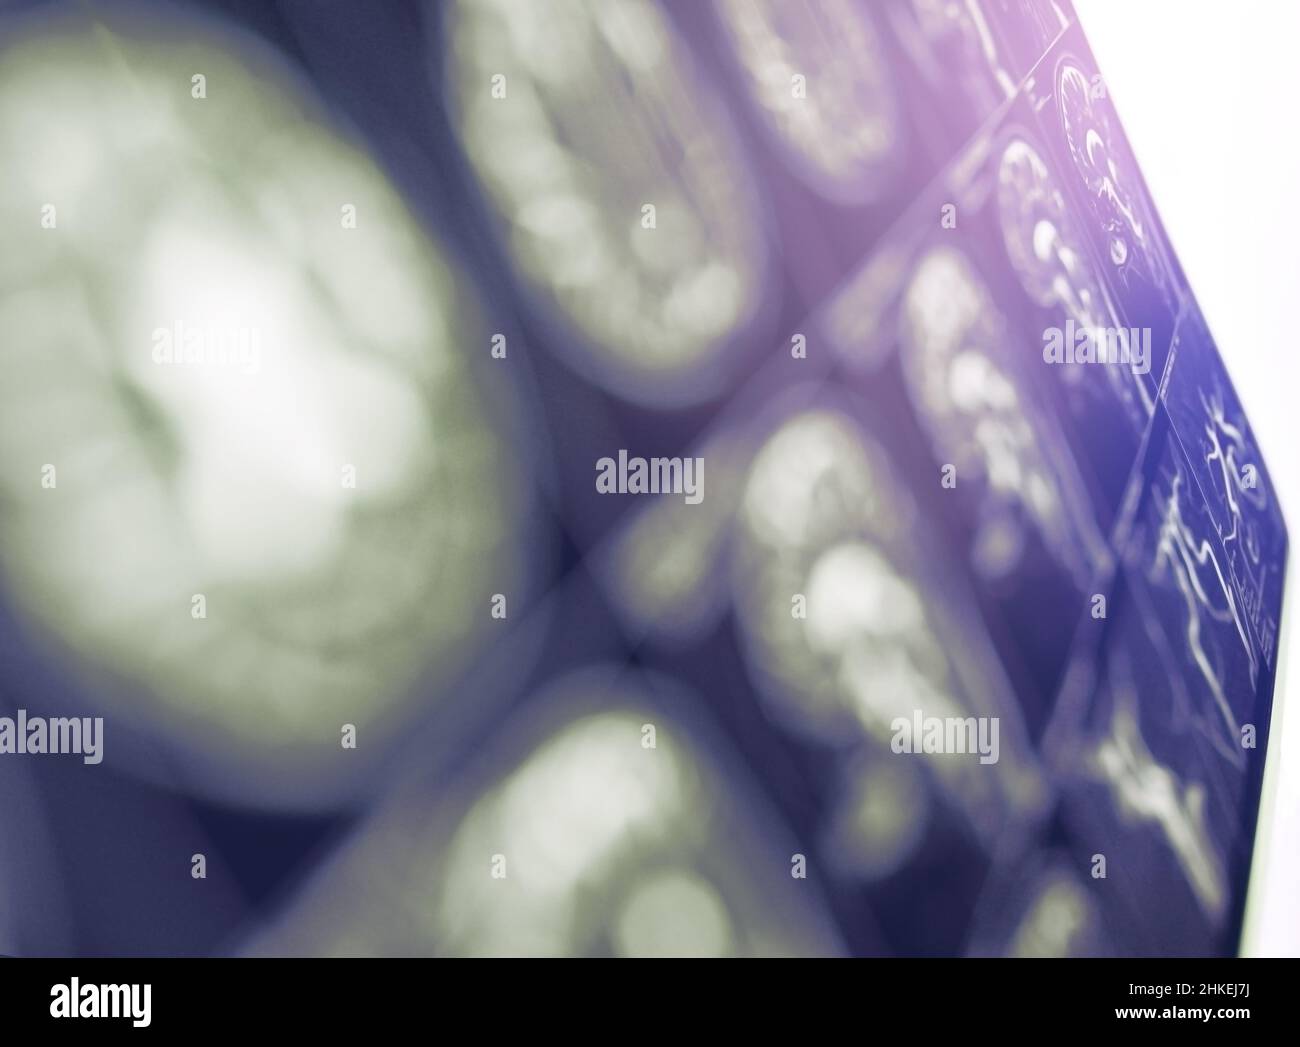 MRI image of brain as a unfocused medical background. Stock Photo